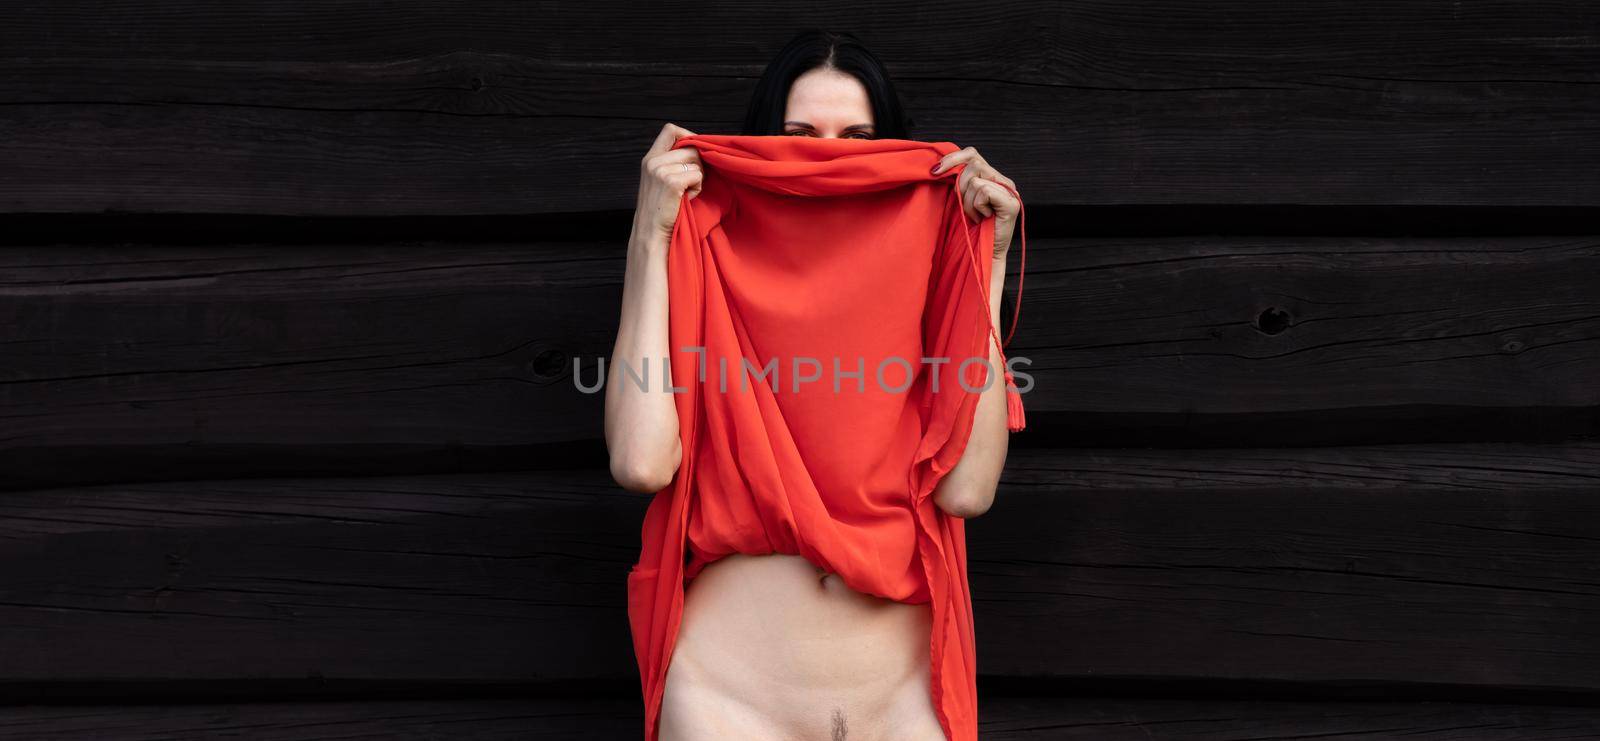 red dress and naked body by palinchak